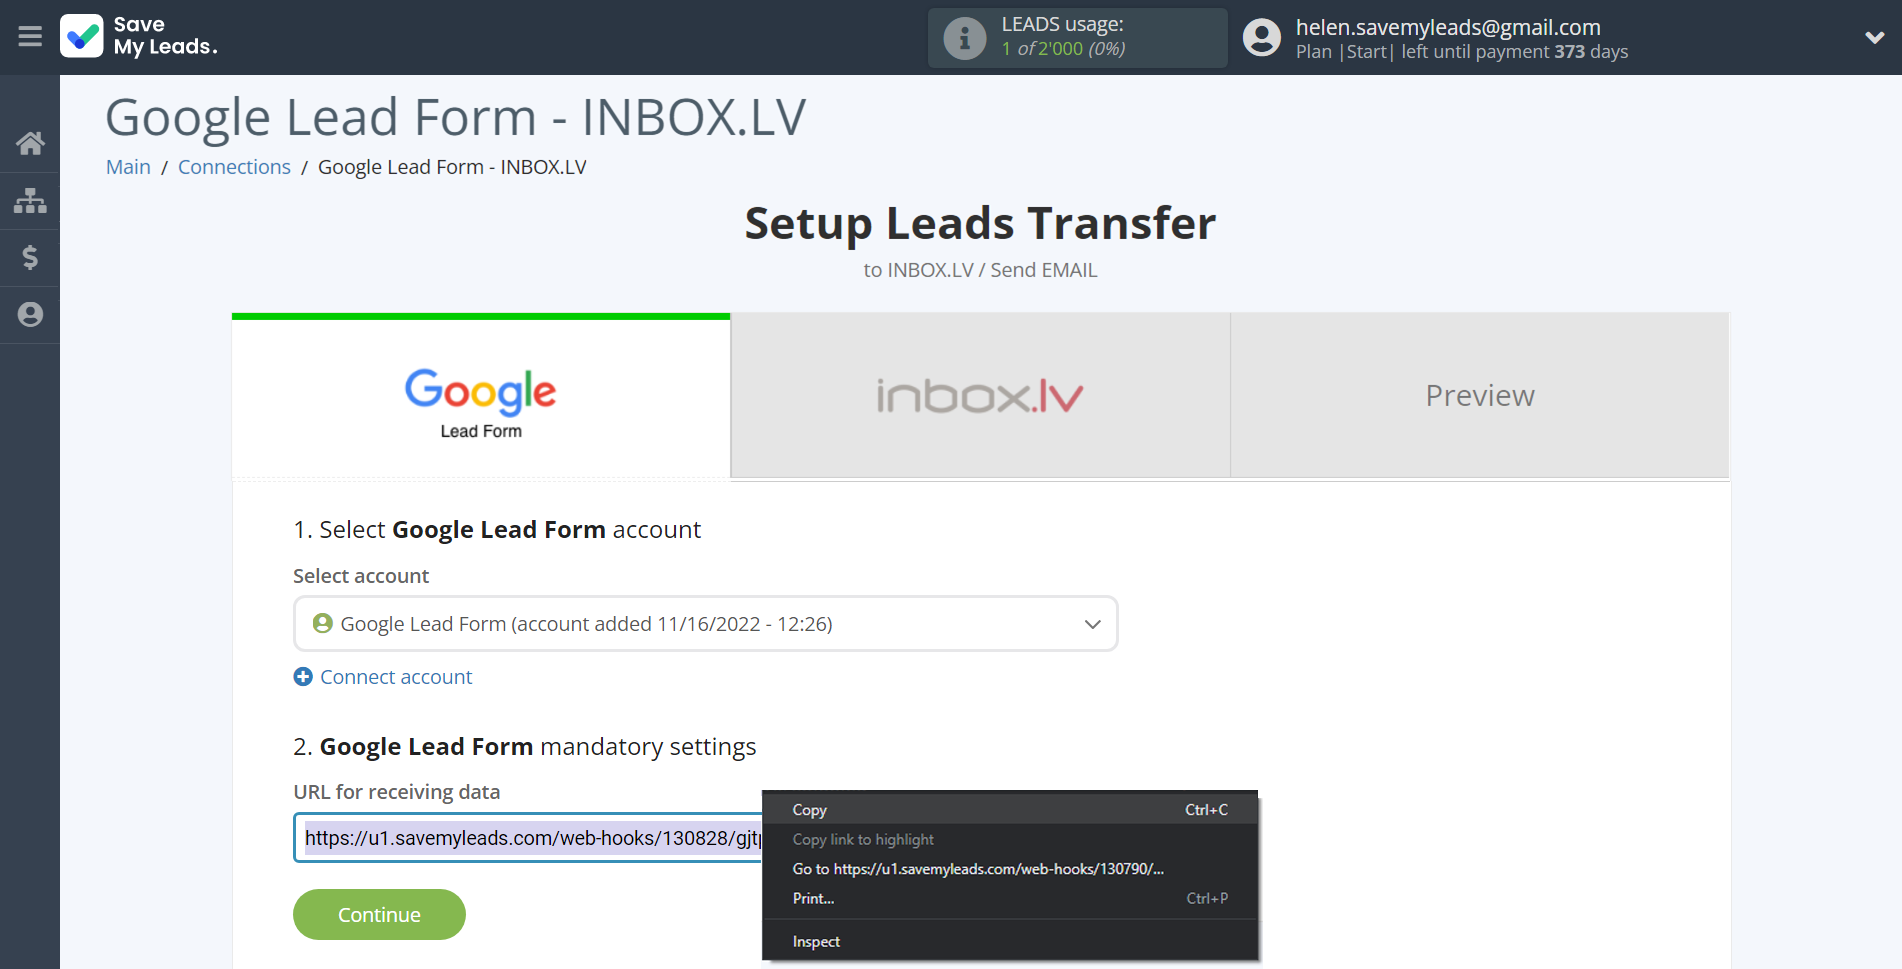 How to Connect Google Lead Form with INBOX.LV | Data Source account connection